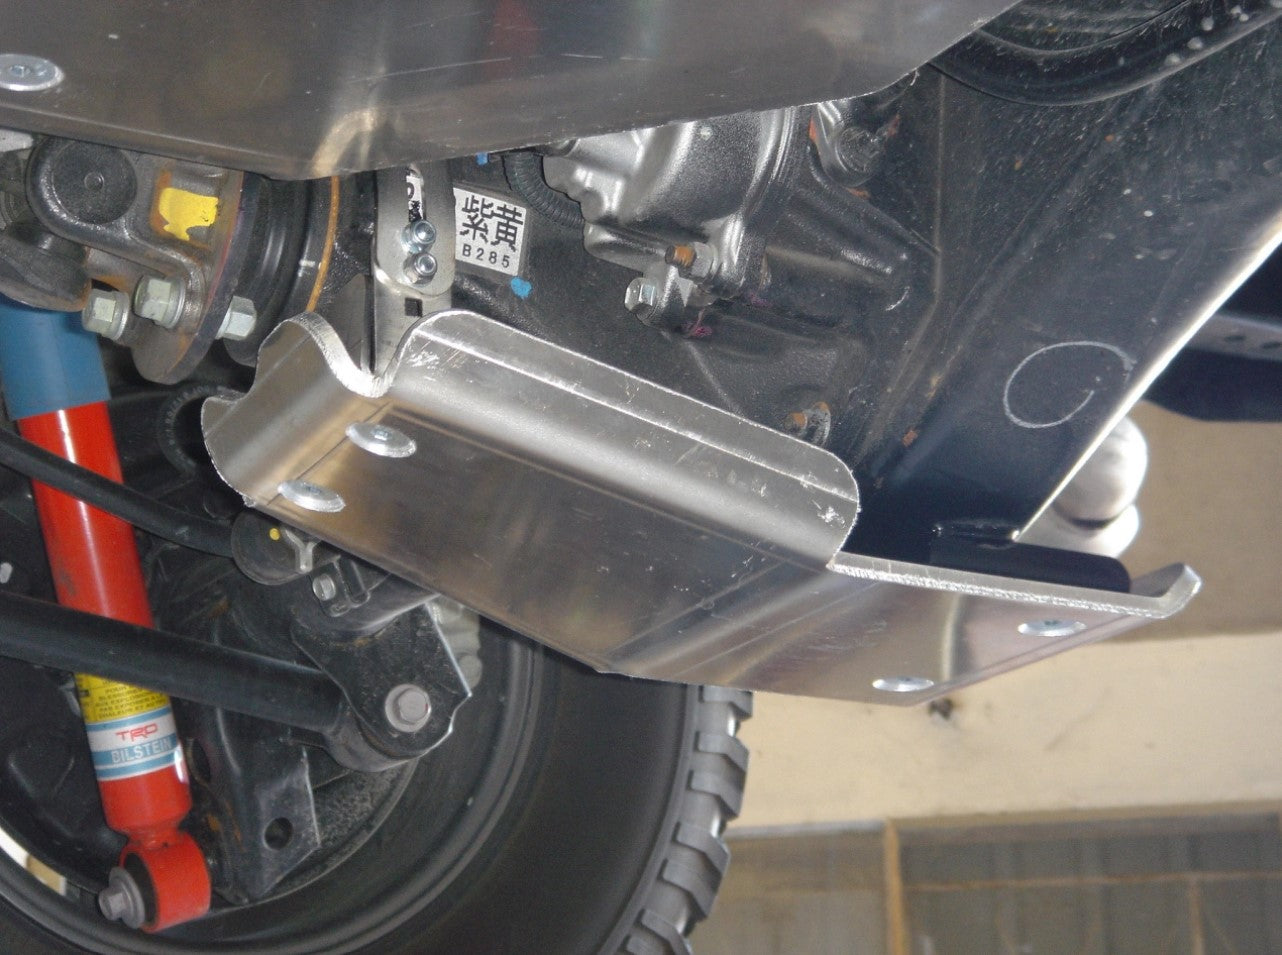 under a vehicle with a fixed aluminium guard